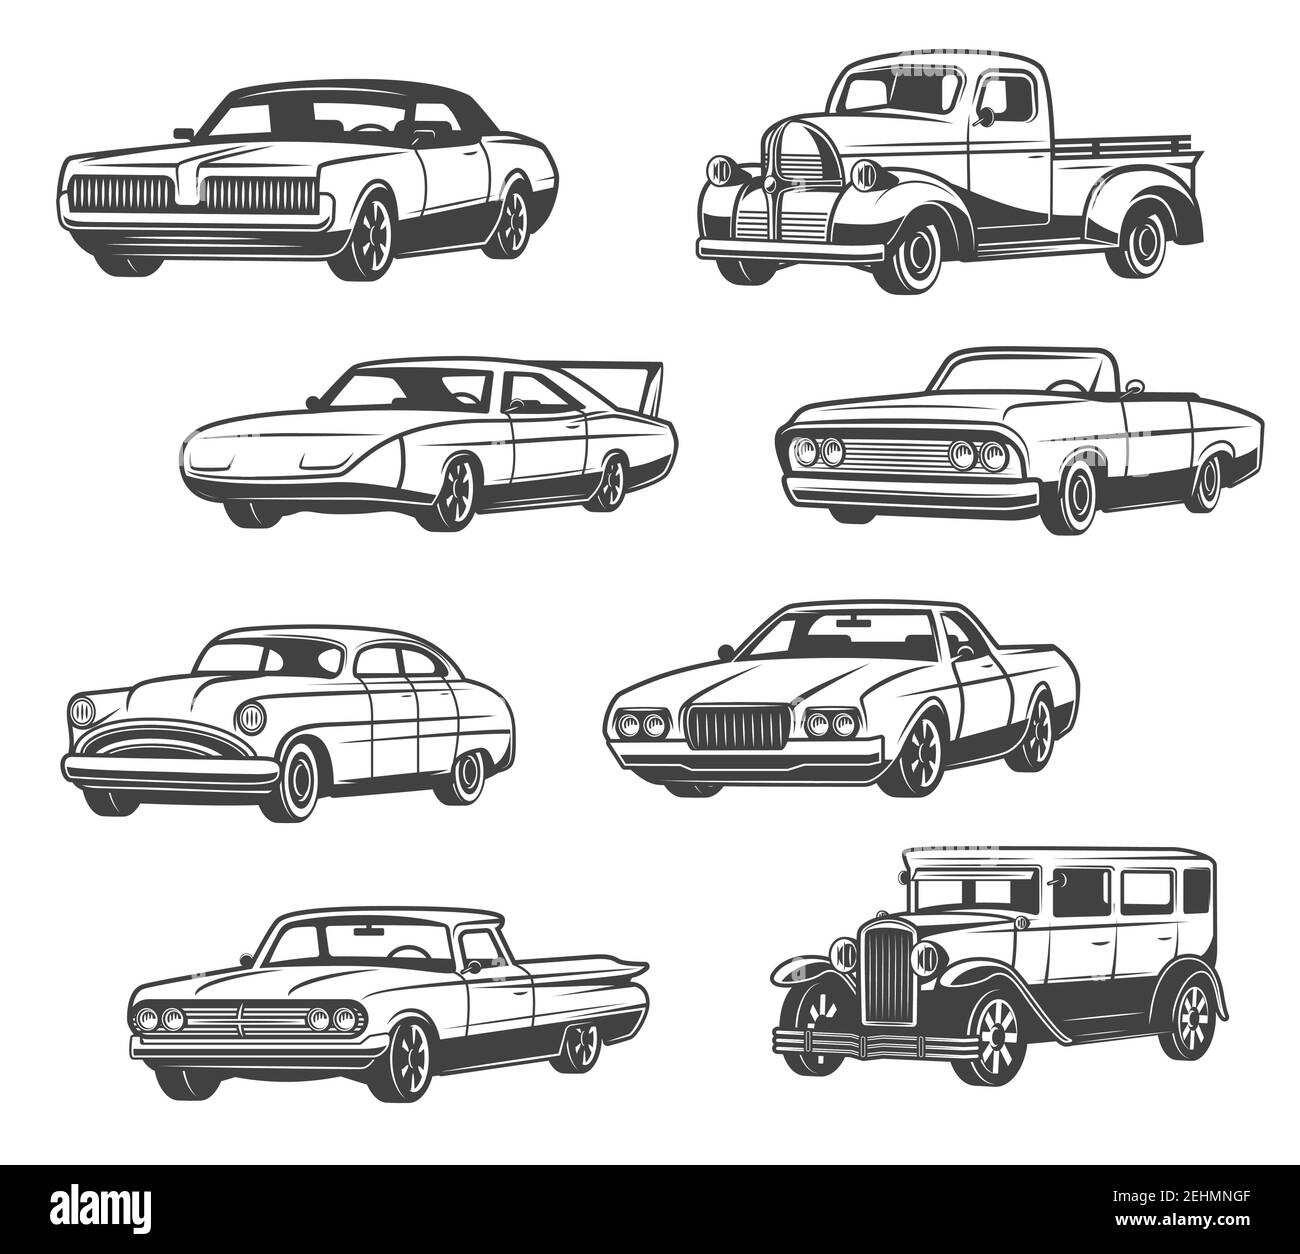 Retro cars and vintage automobile models. Vector isolated icons of antique minivan or passenger coach with taxi cab or sport car cabriolet with retrac Stock Vector